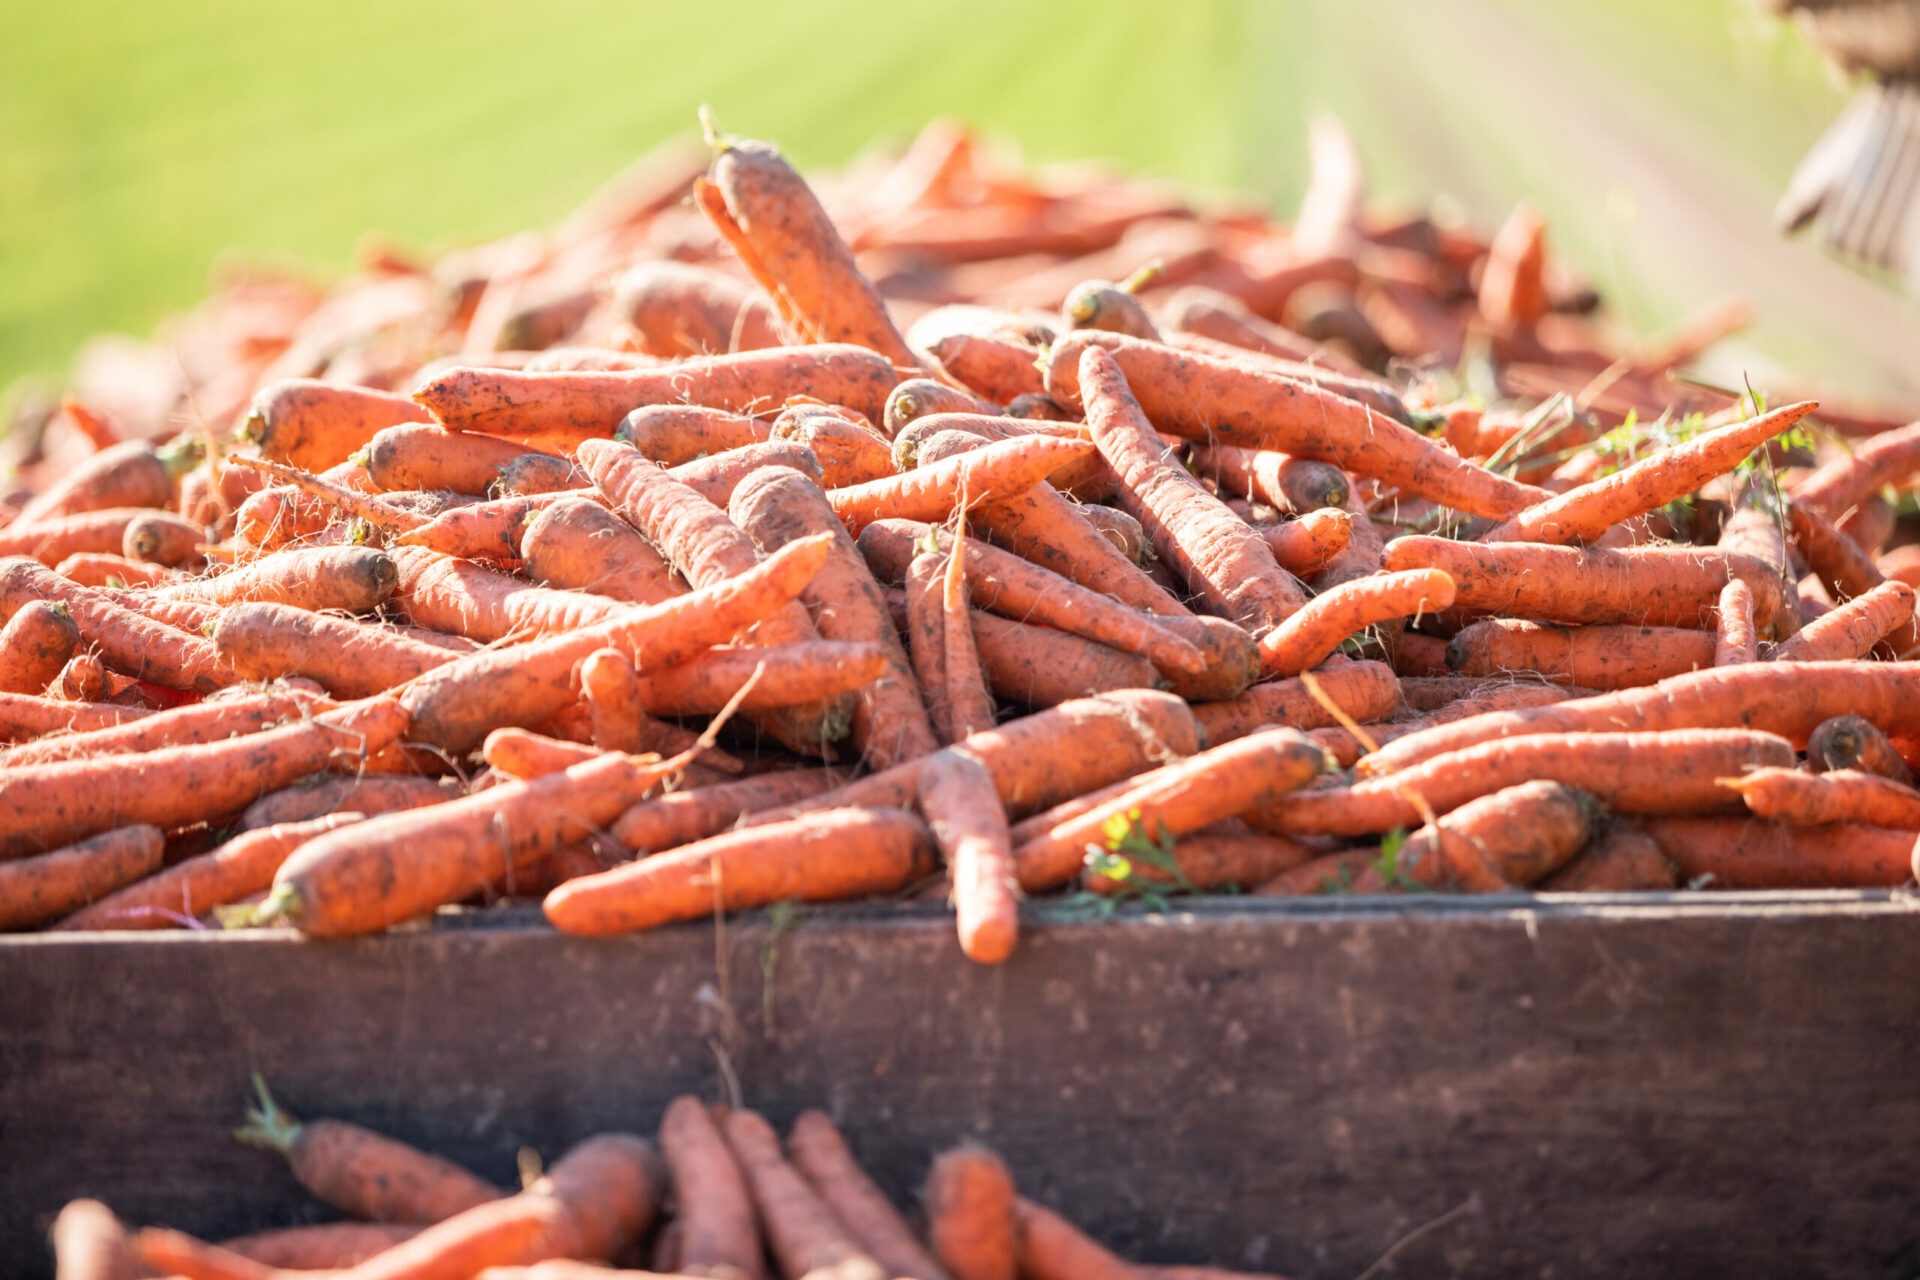 A crate full of fresh, just-harvested carrots.